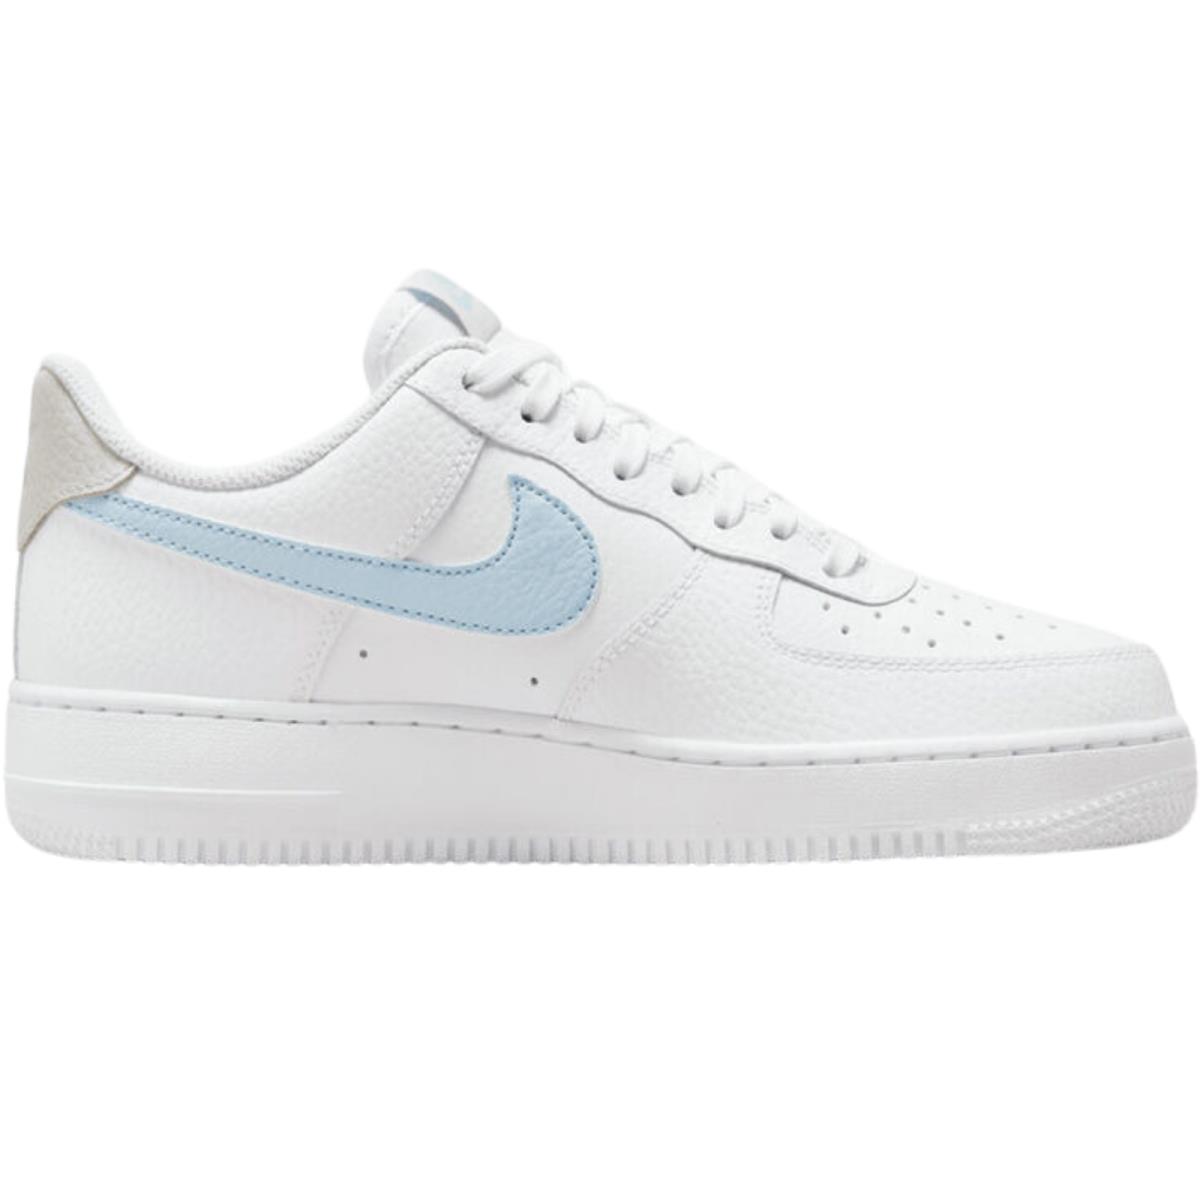 Nike Air Force 1 Women`s Casual Shoes All Colors US Sizes 6-11 White/Light Armory Blue/Light Bone